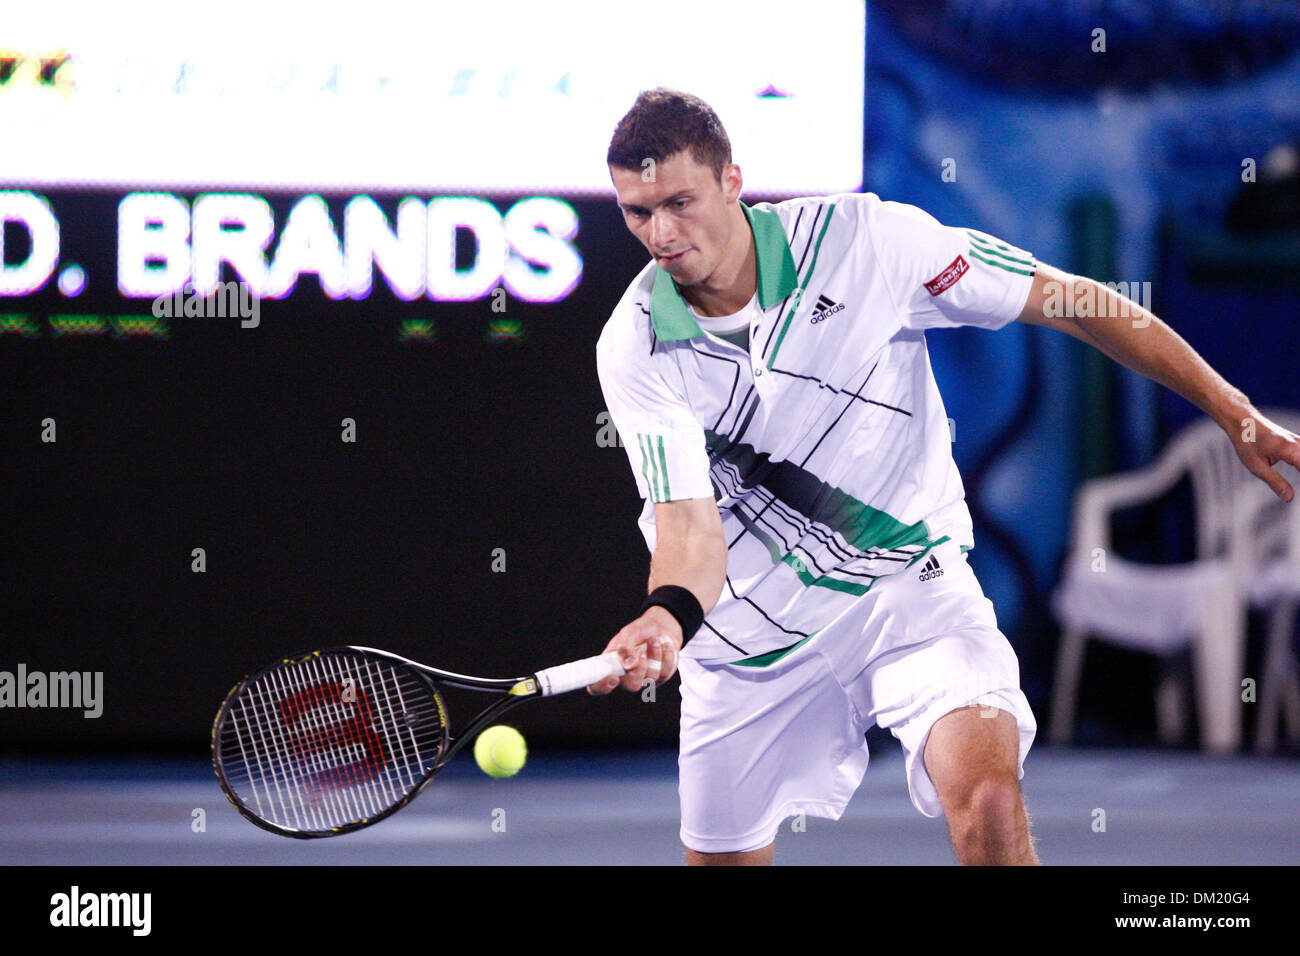 ATP Singles World Tour player Daniel Brands of the Germany returns the ball  to match winner Ivo Karlovic of Croatia during the second round of the ATP  Delray Beach International Tennis Championships